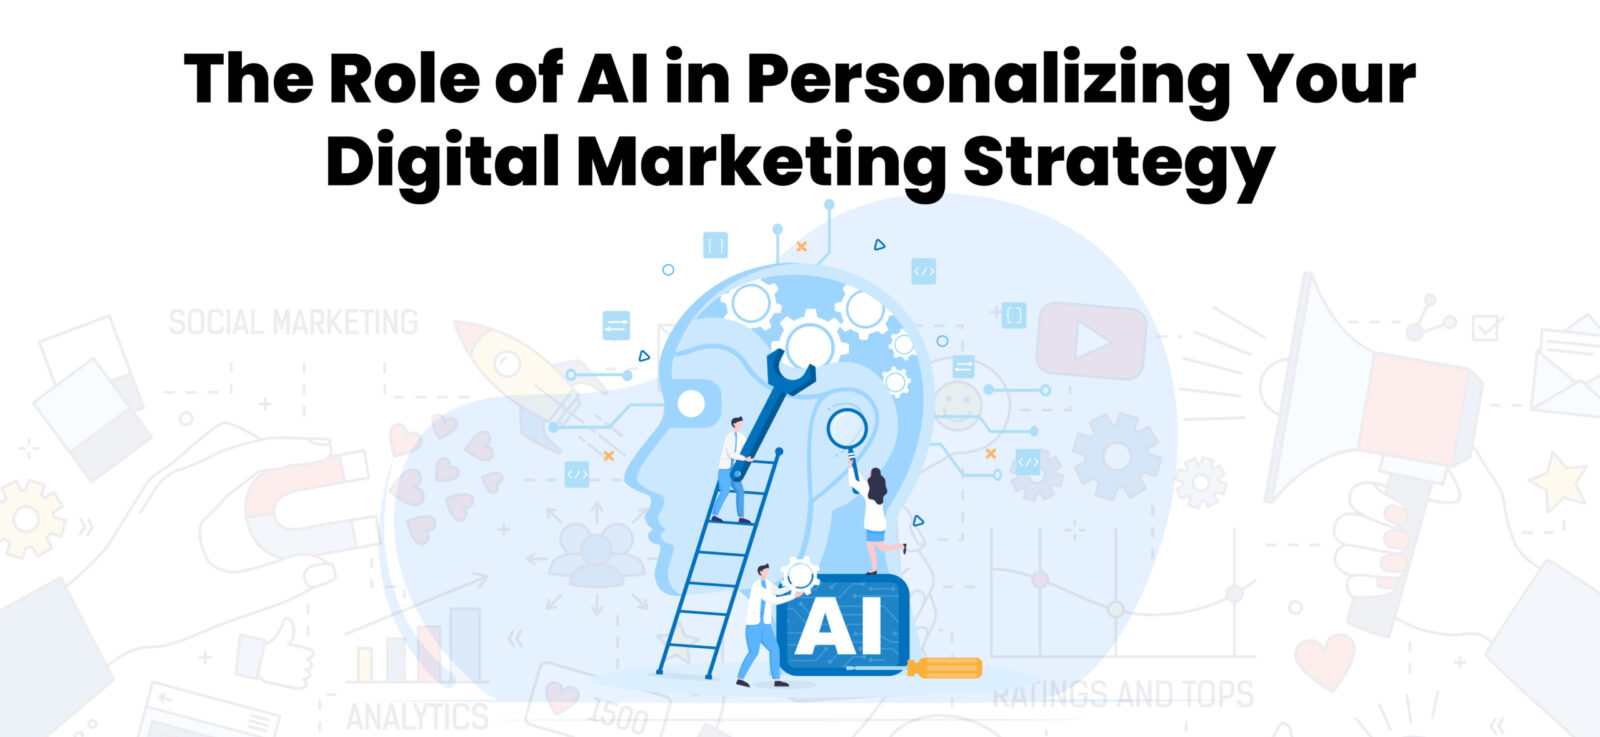 The Role of AI in Personalizing Your Digital Marketing Strategy